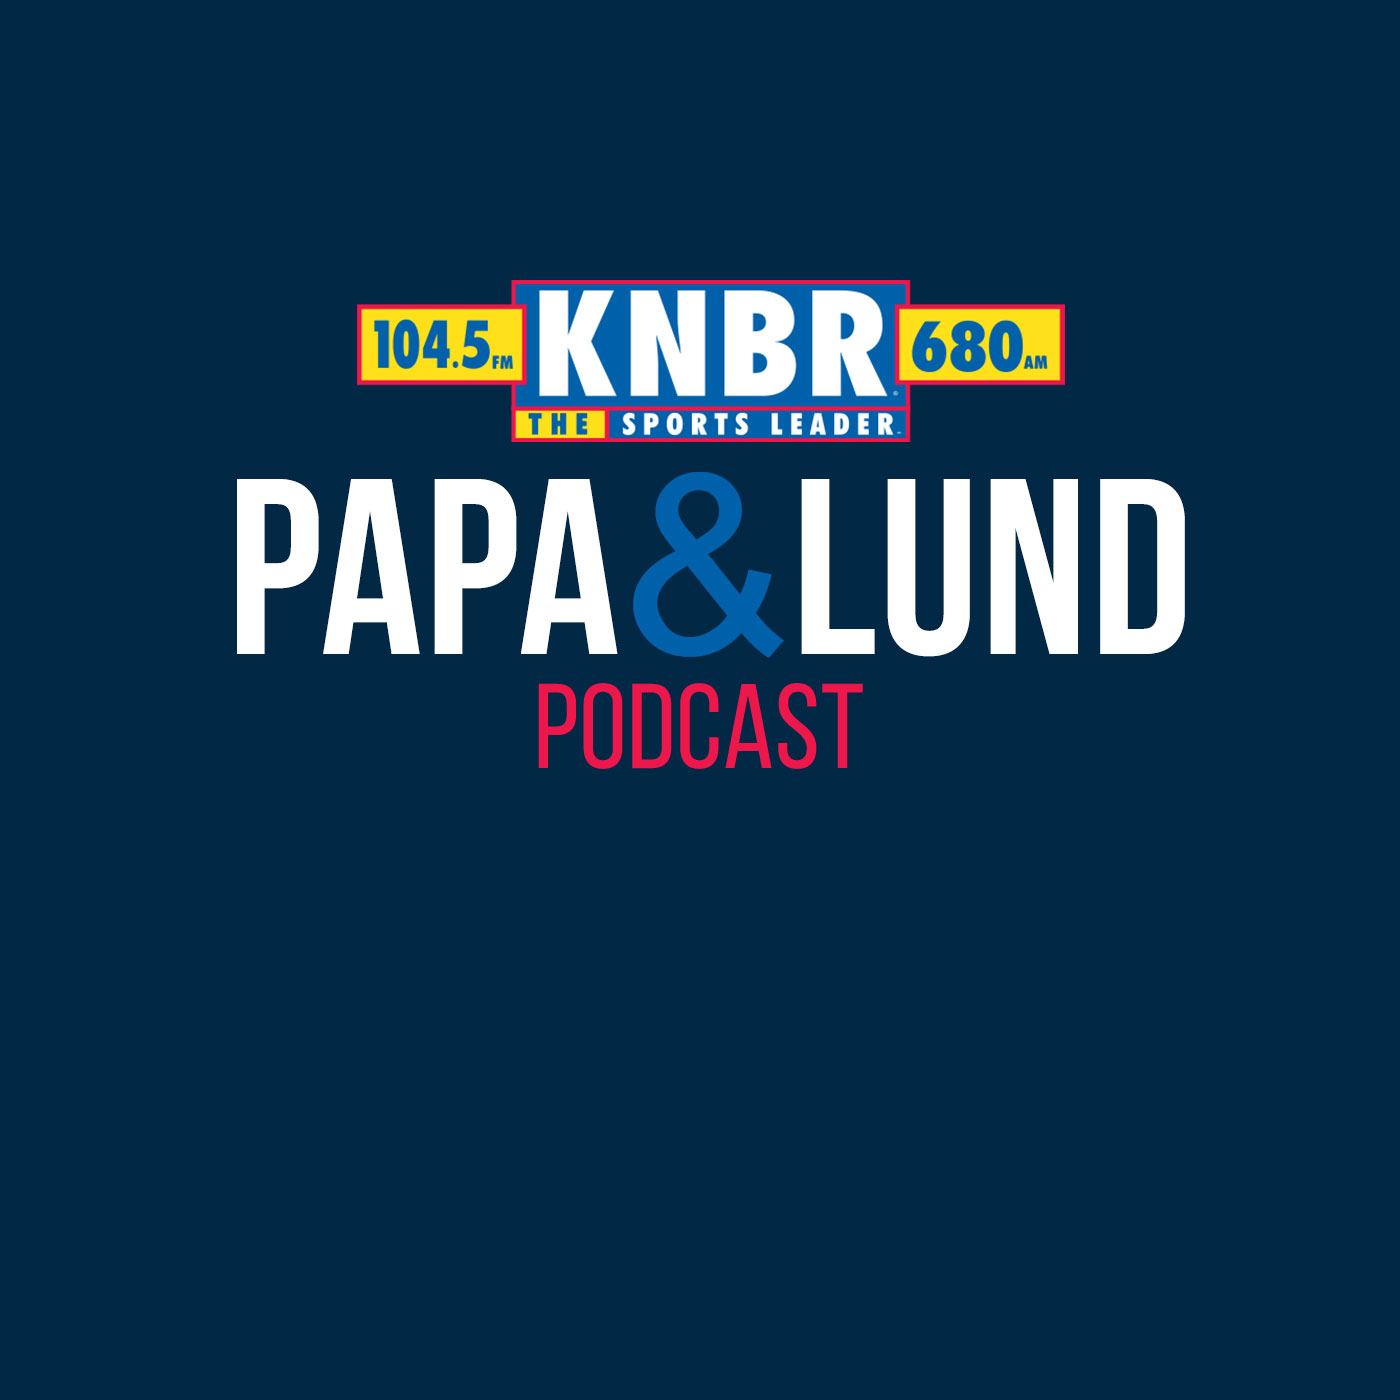 10-4 Bob Sturm joins Papa & Lund to preview the big 49ers/Cowboys matchup on Sunday Night and what potential problems the Cowboys defense can present for Brock Purdy and their star studded offense